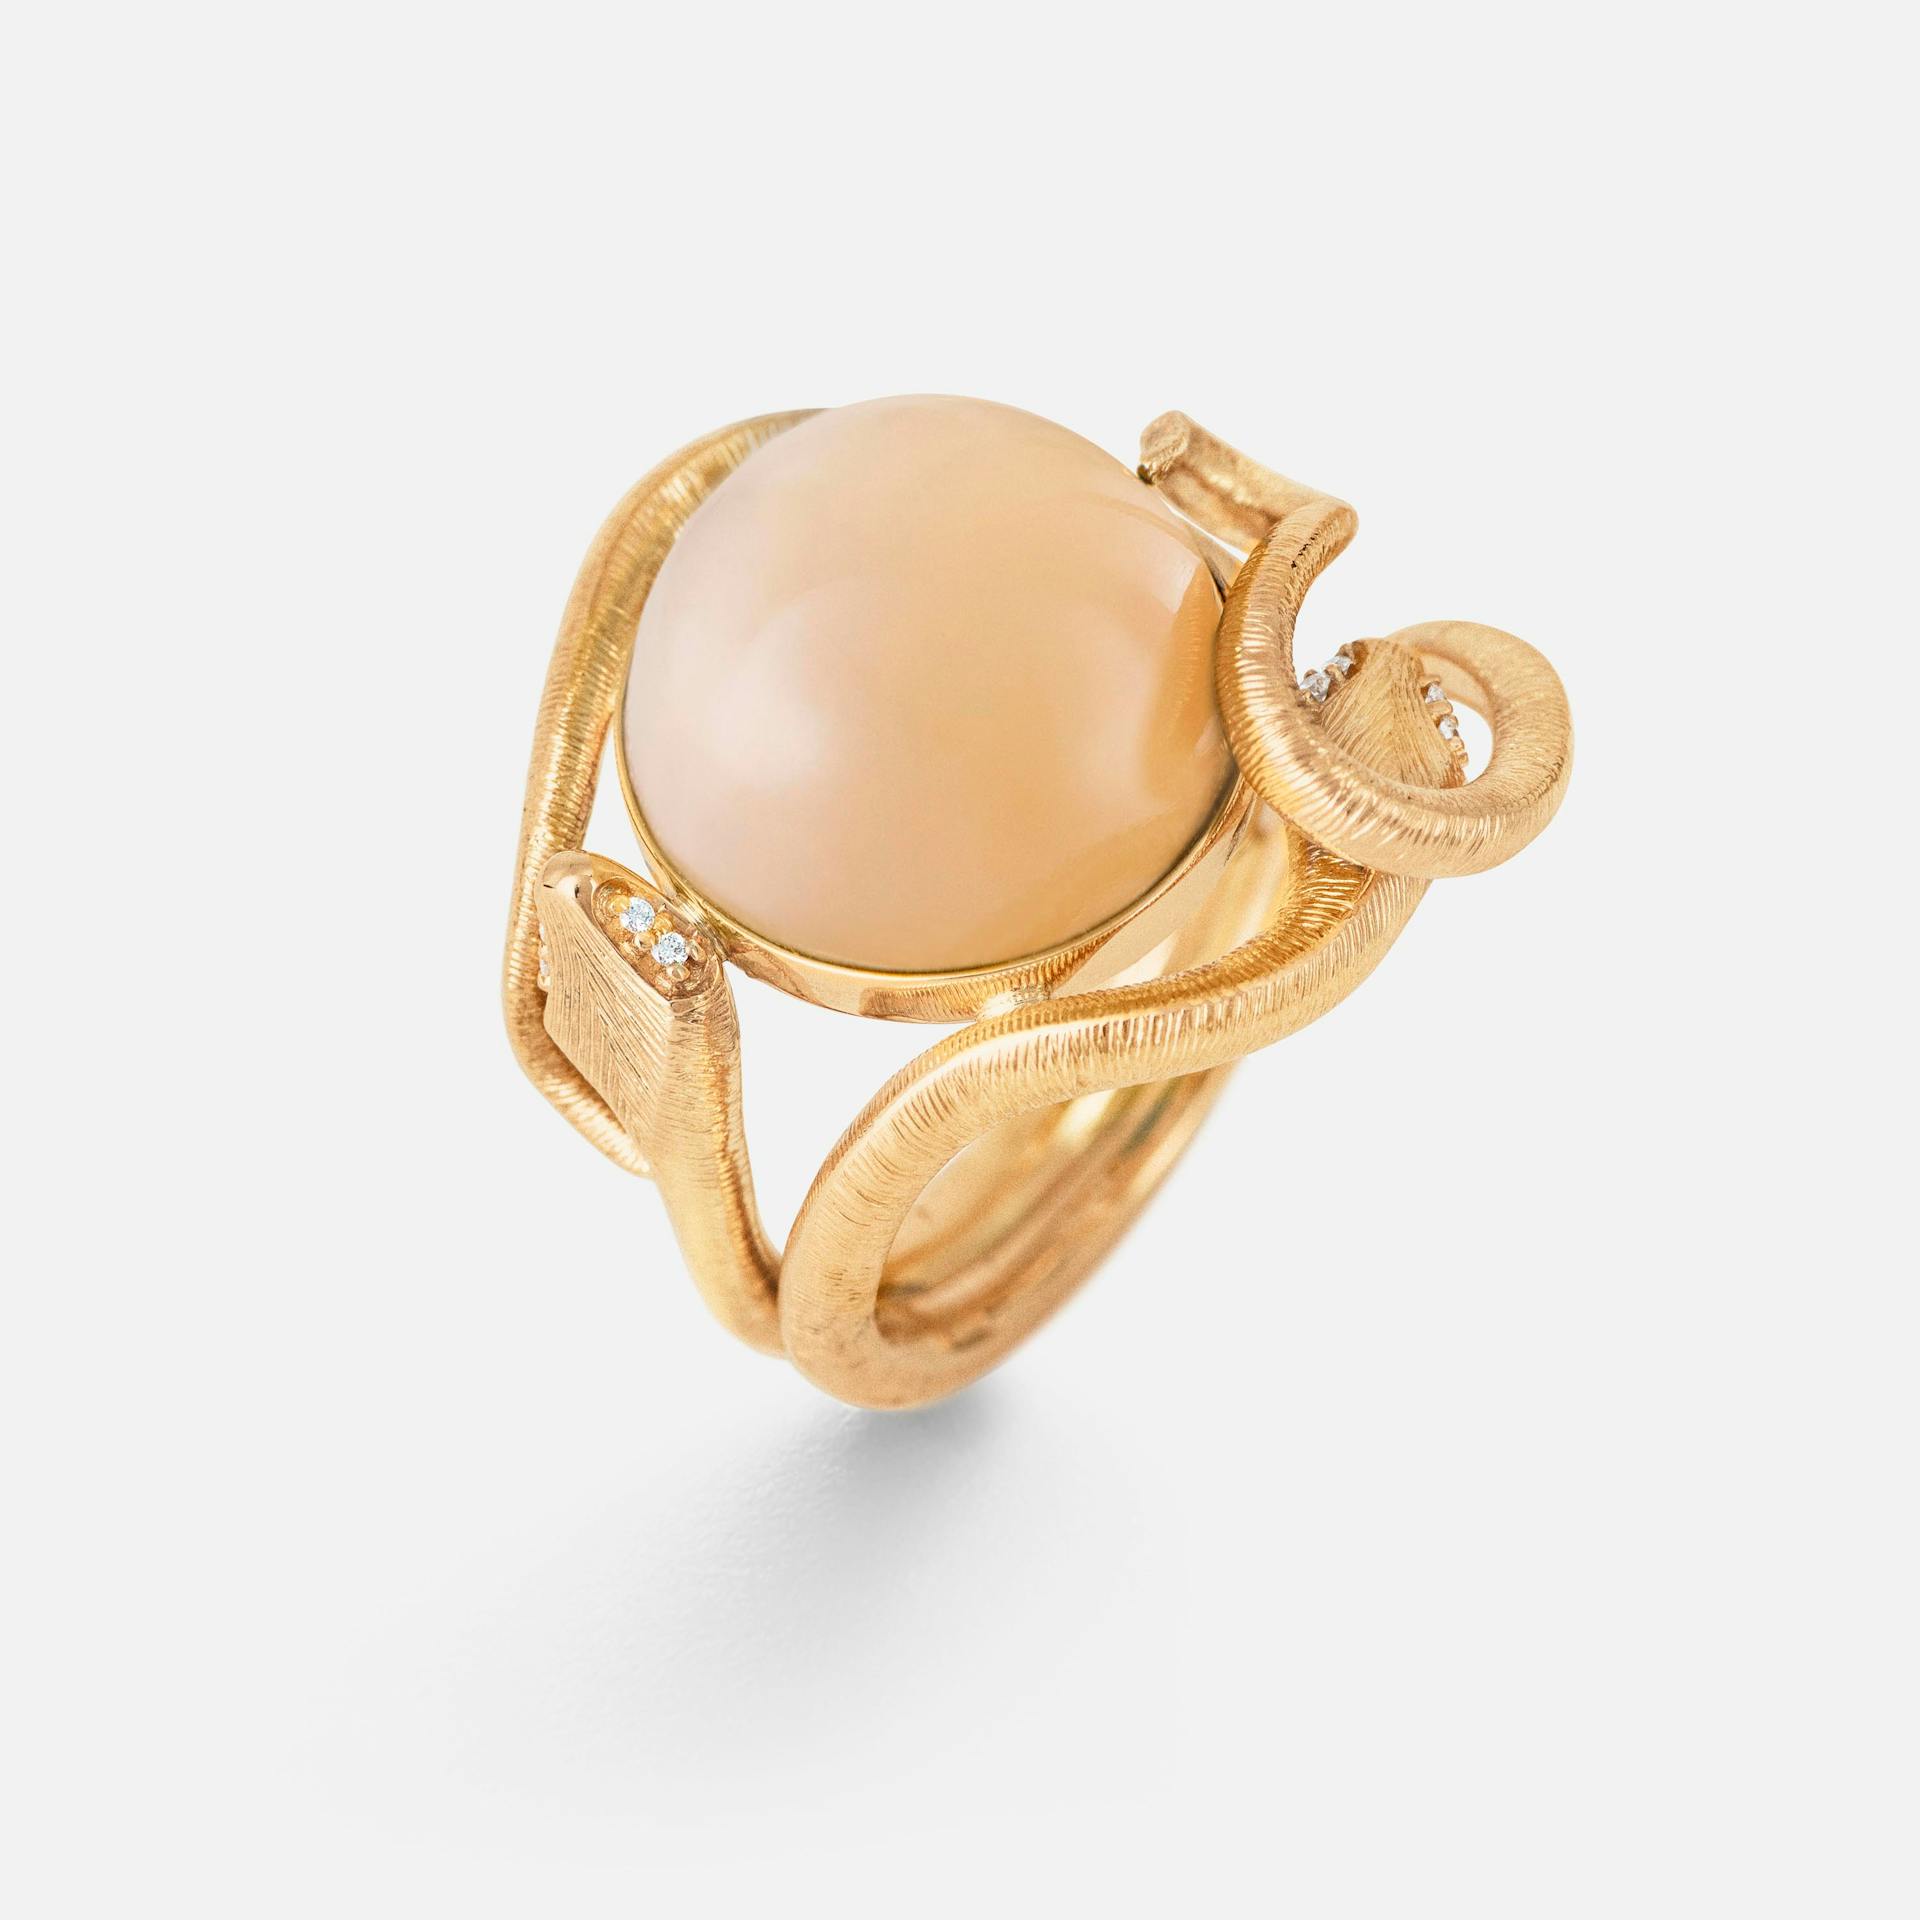 Snakes ring 18k gold with blush moonstone and diamonds 0.04 ct. TW.VS.